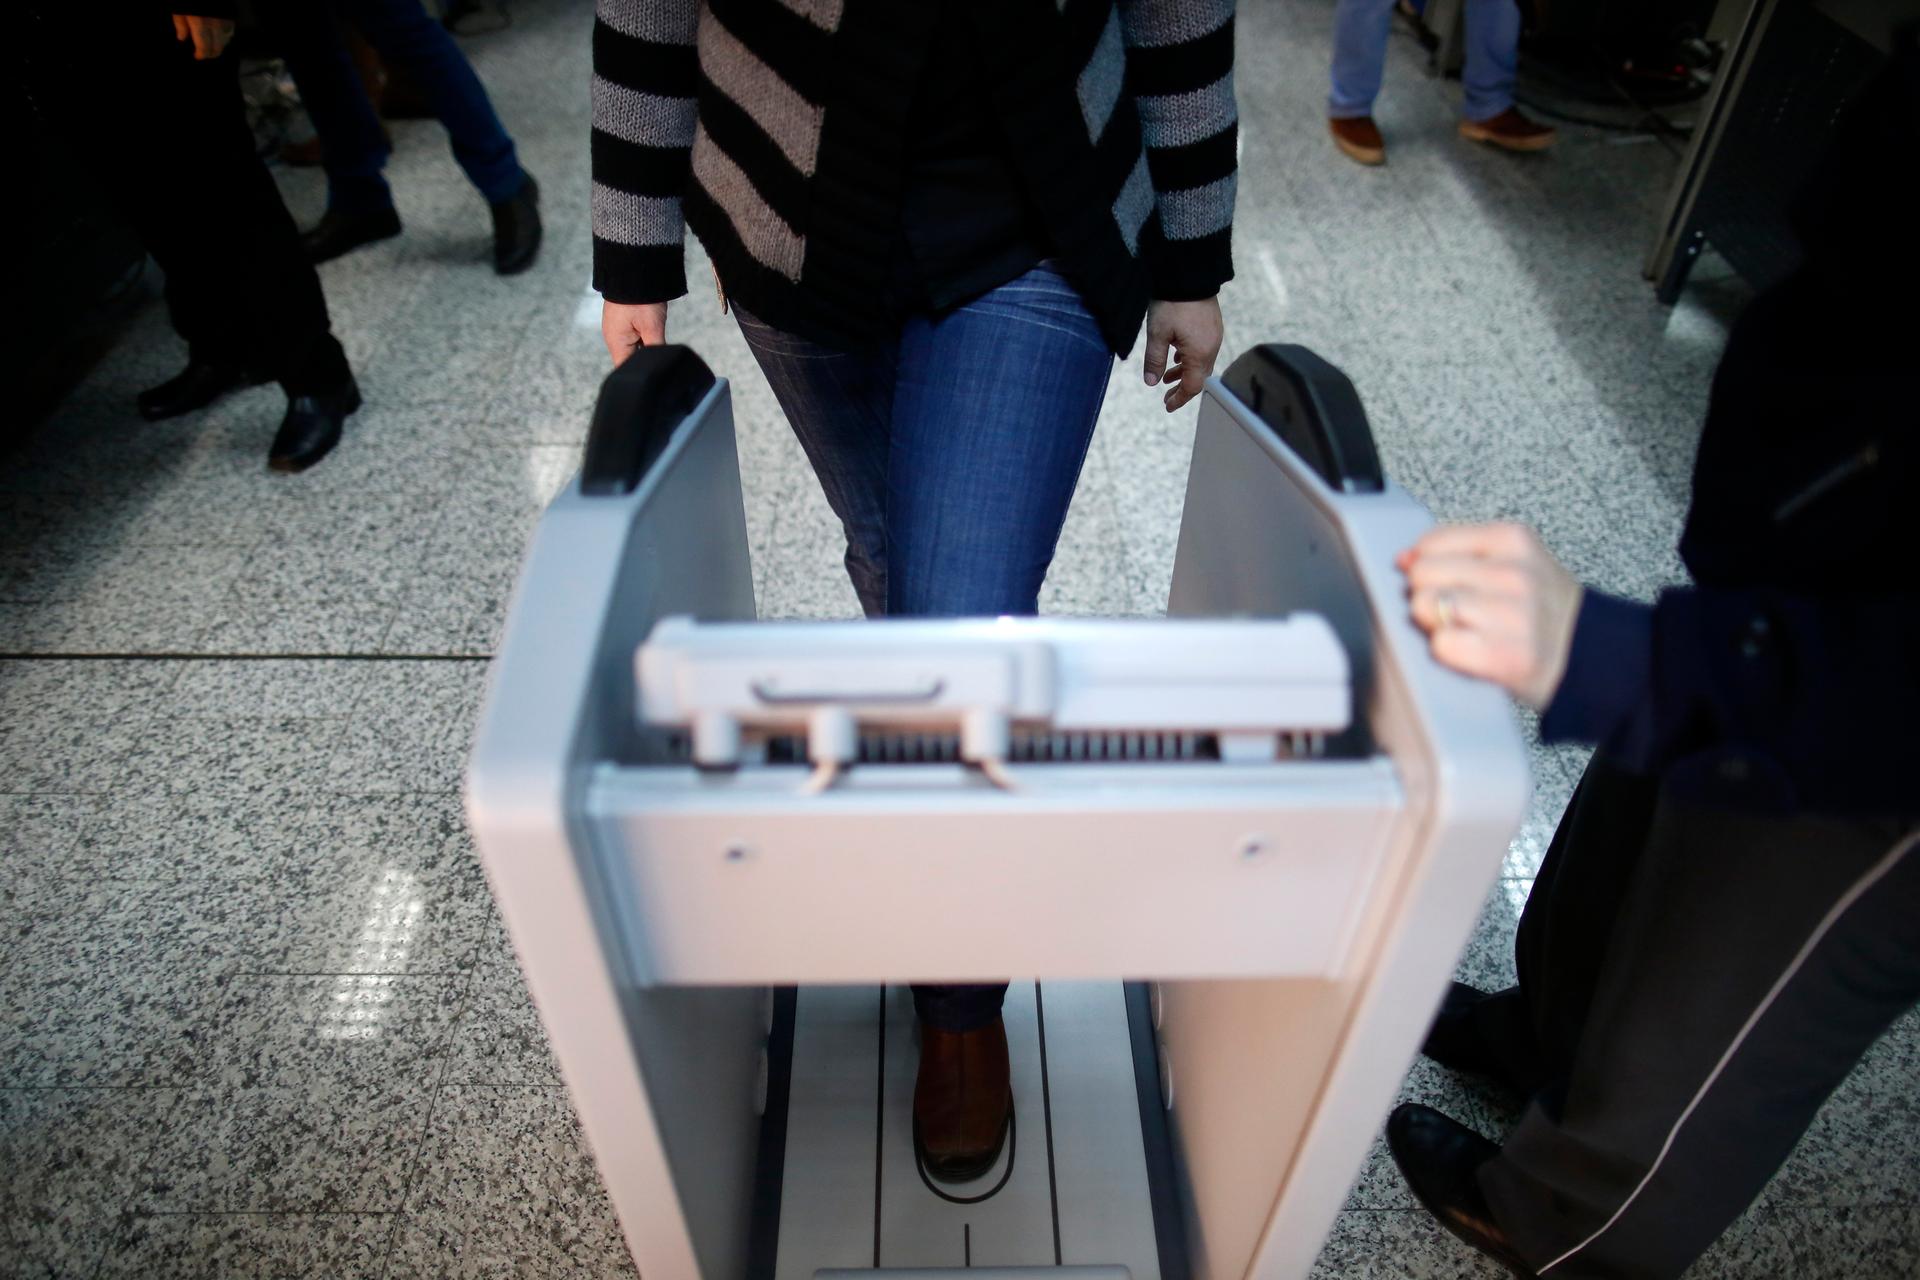 A woman goes through security checks at the Sarajevo International Airport in Sarajevo February 26, 2014.